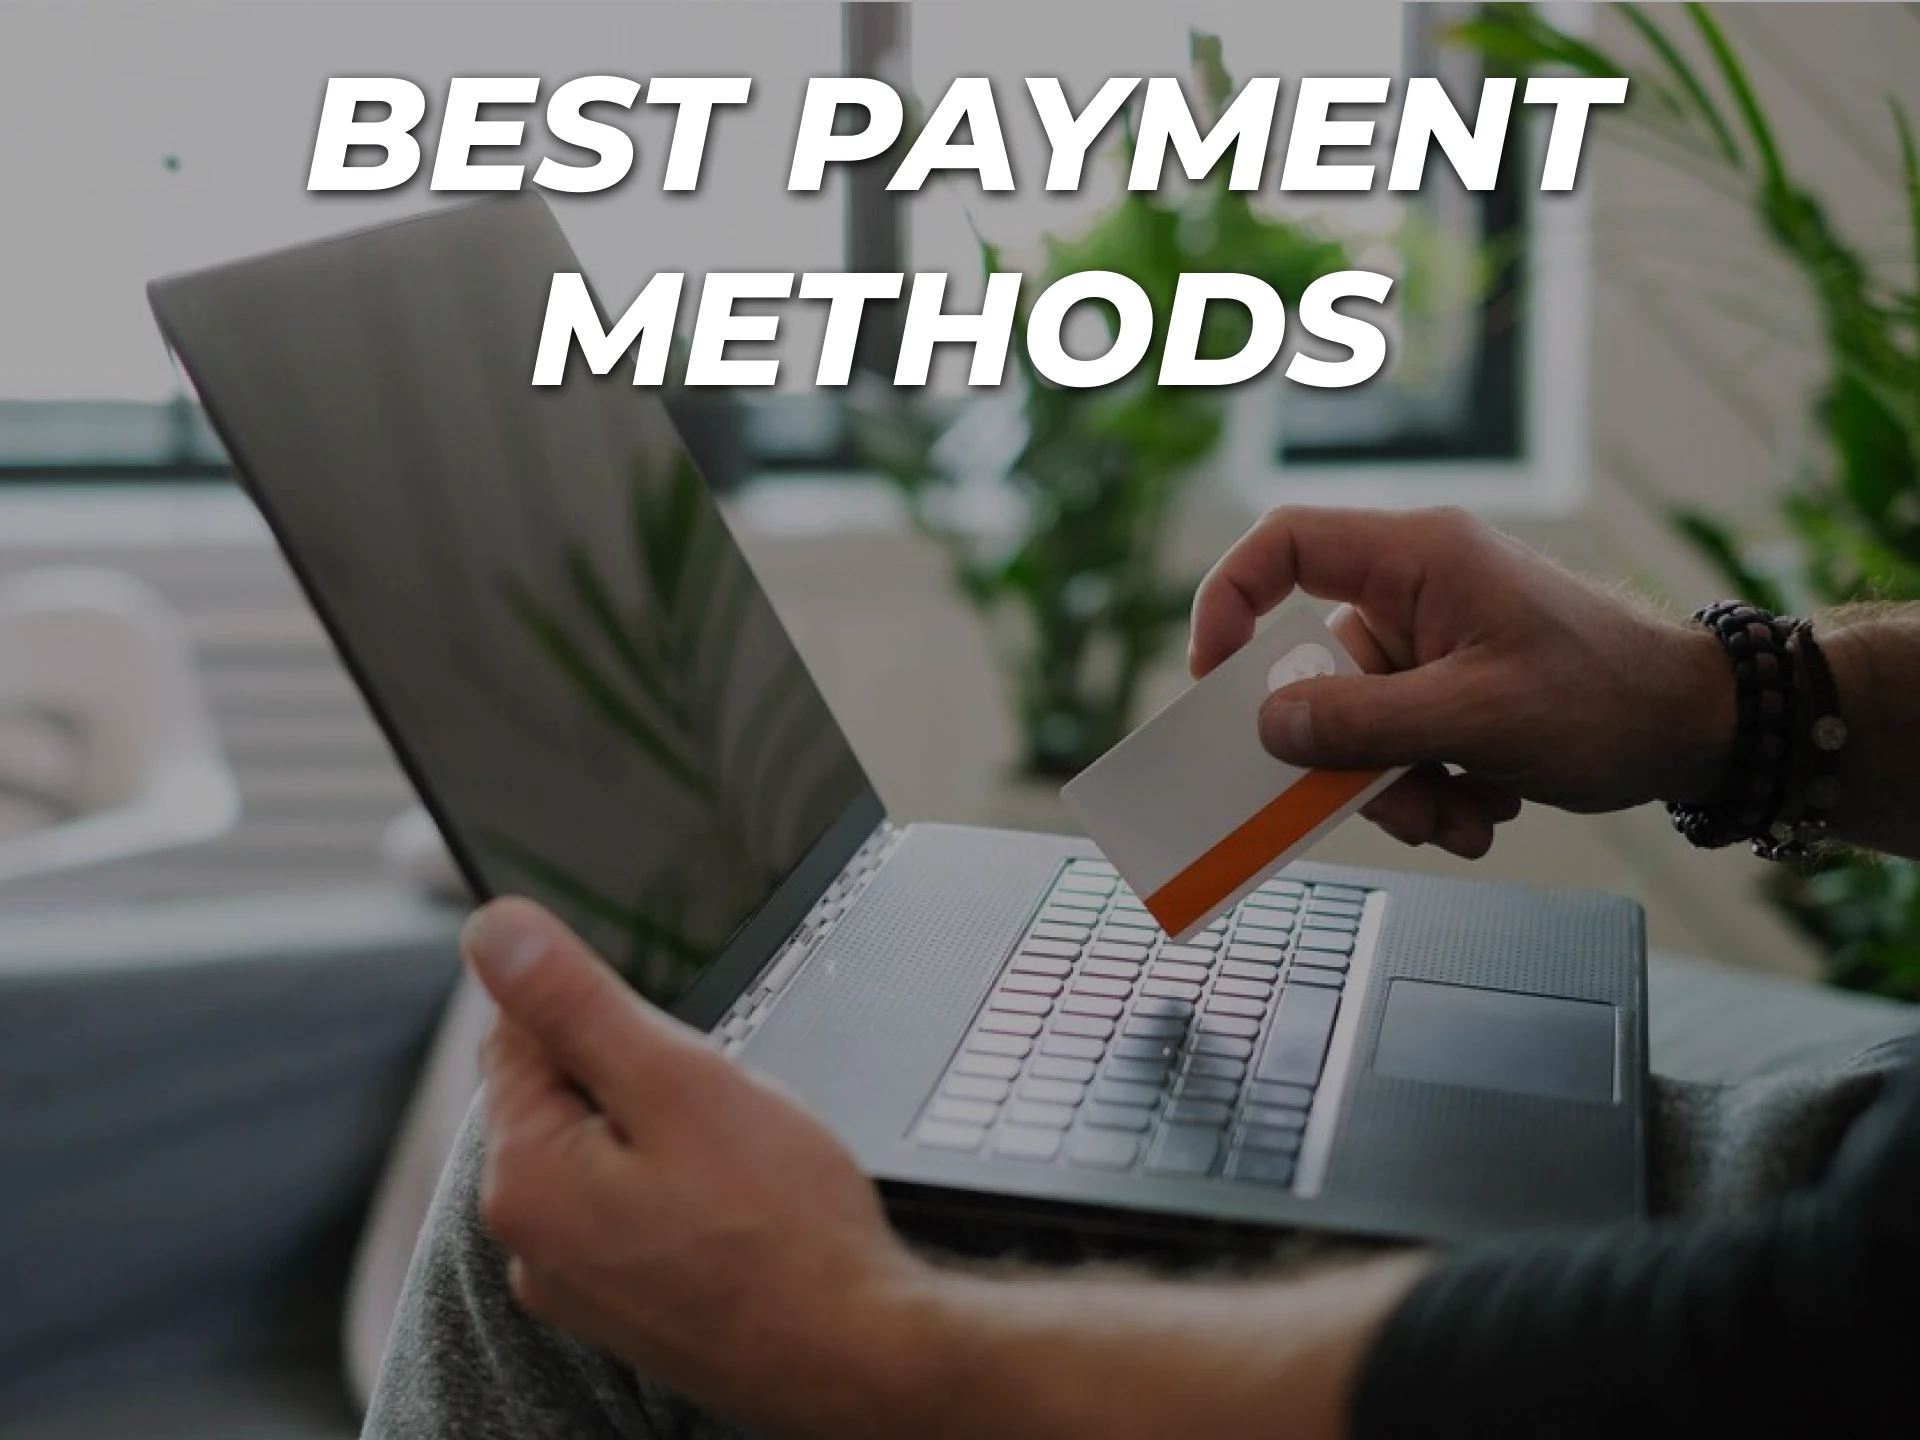 Make sure you use secure payment methods.